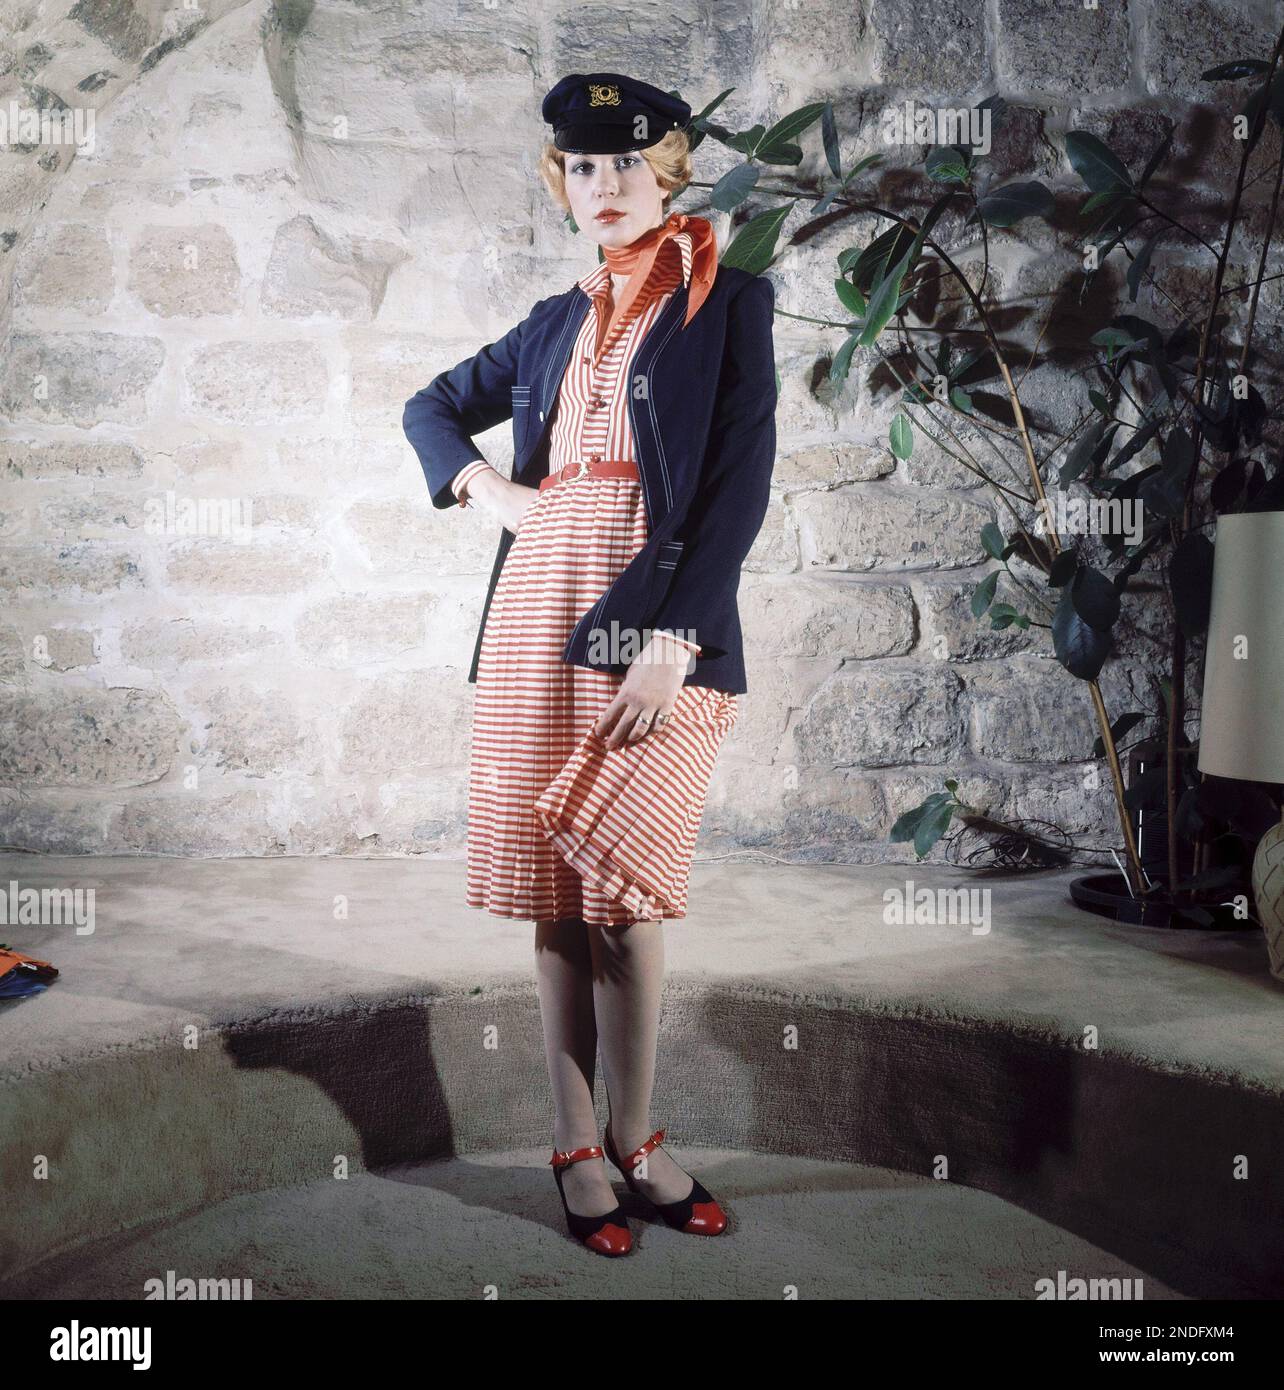 Fashion designer Louis Feraud presents in his Spring-Summer 74 collection  this dress, Jan. 22, 1974: holiday dream' red and white navy styled dress,  pleated. Marine alpaga blazer, bicolored shoes and sailor cap. (